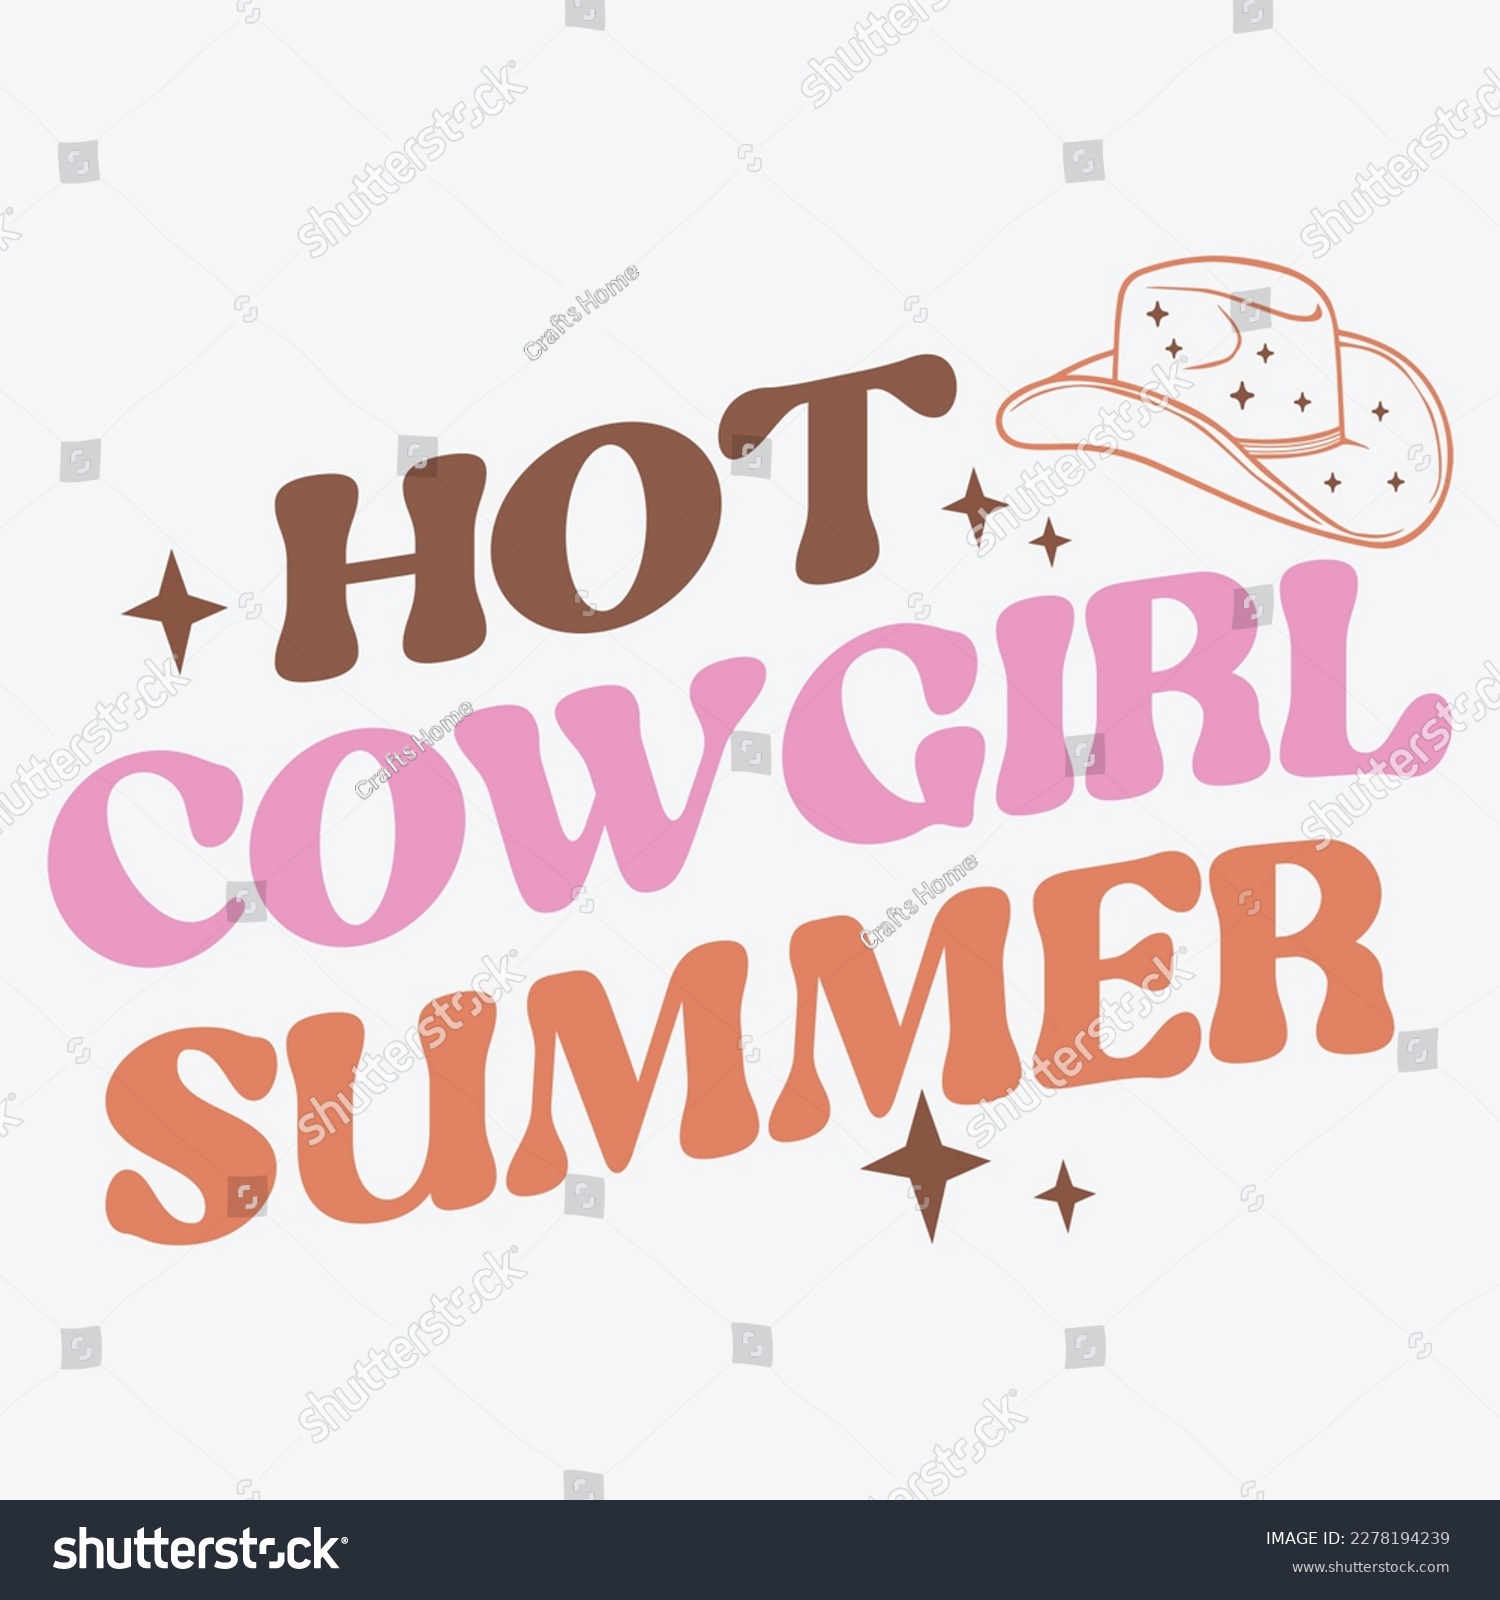 SVG of  Hot Cow Girl Summer, cute, animals, rainbow, funny, flowers, life, colorful, summer, trendy, retro, lol, cool, typography, svg